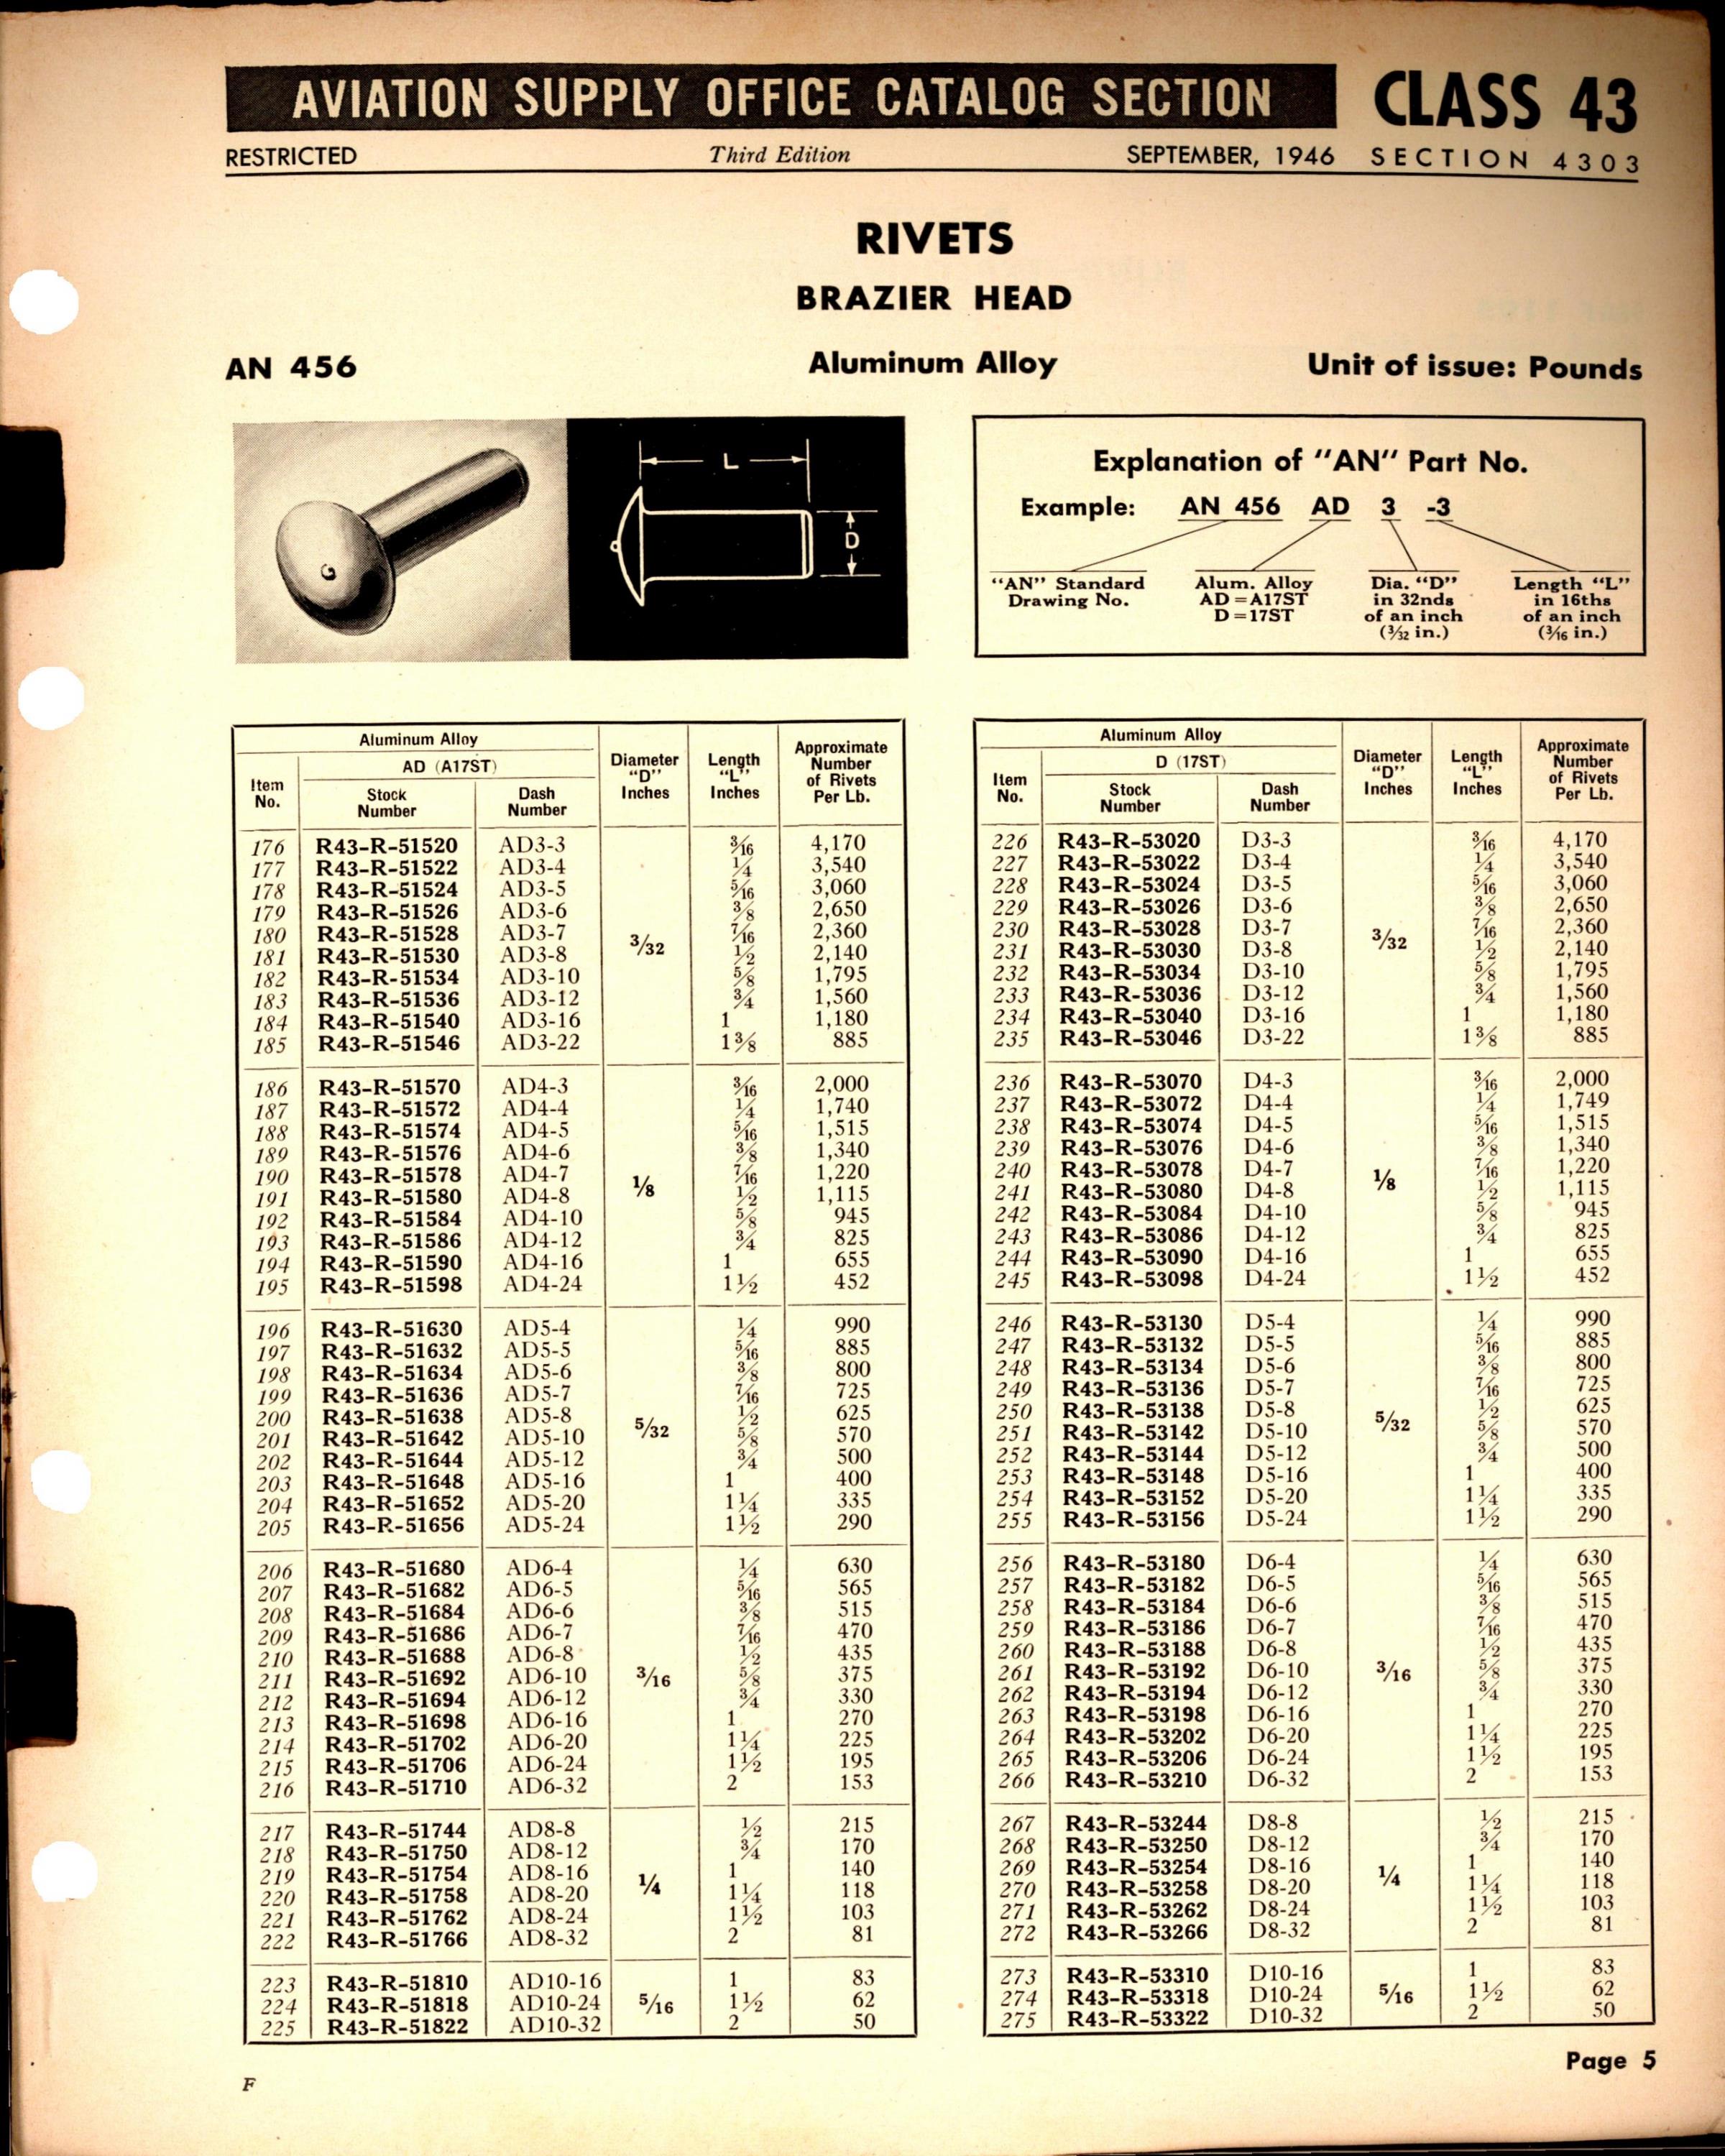 Sample page 5 from AirCorps Library document: Rivets and Rivnuts